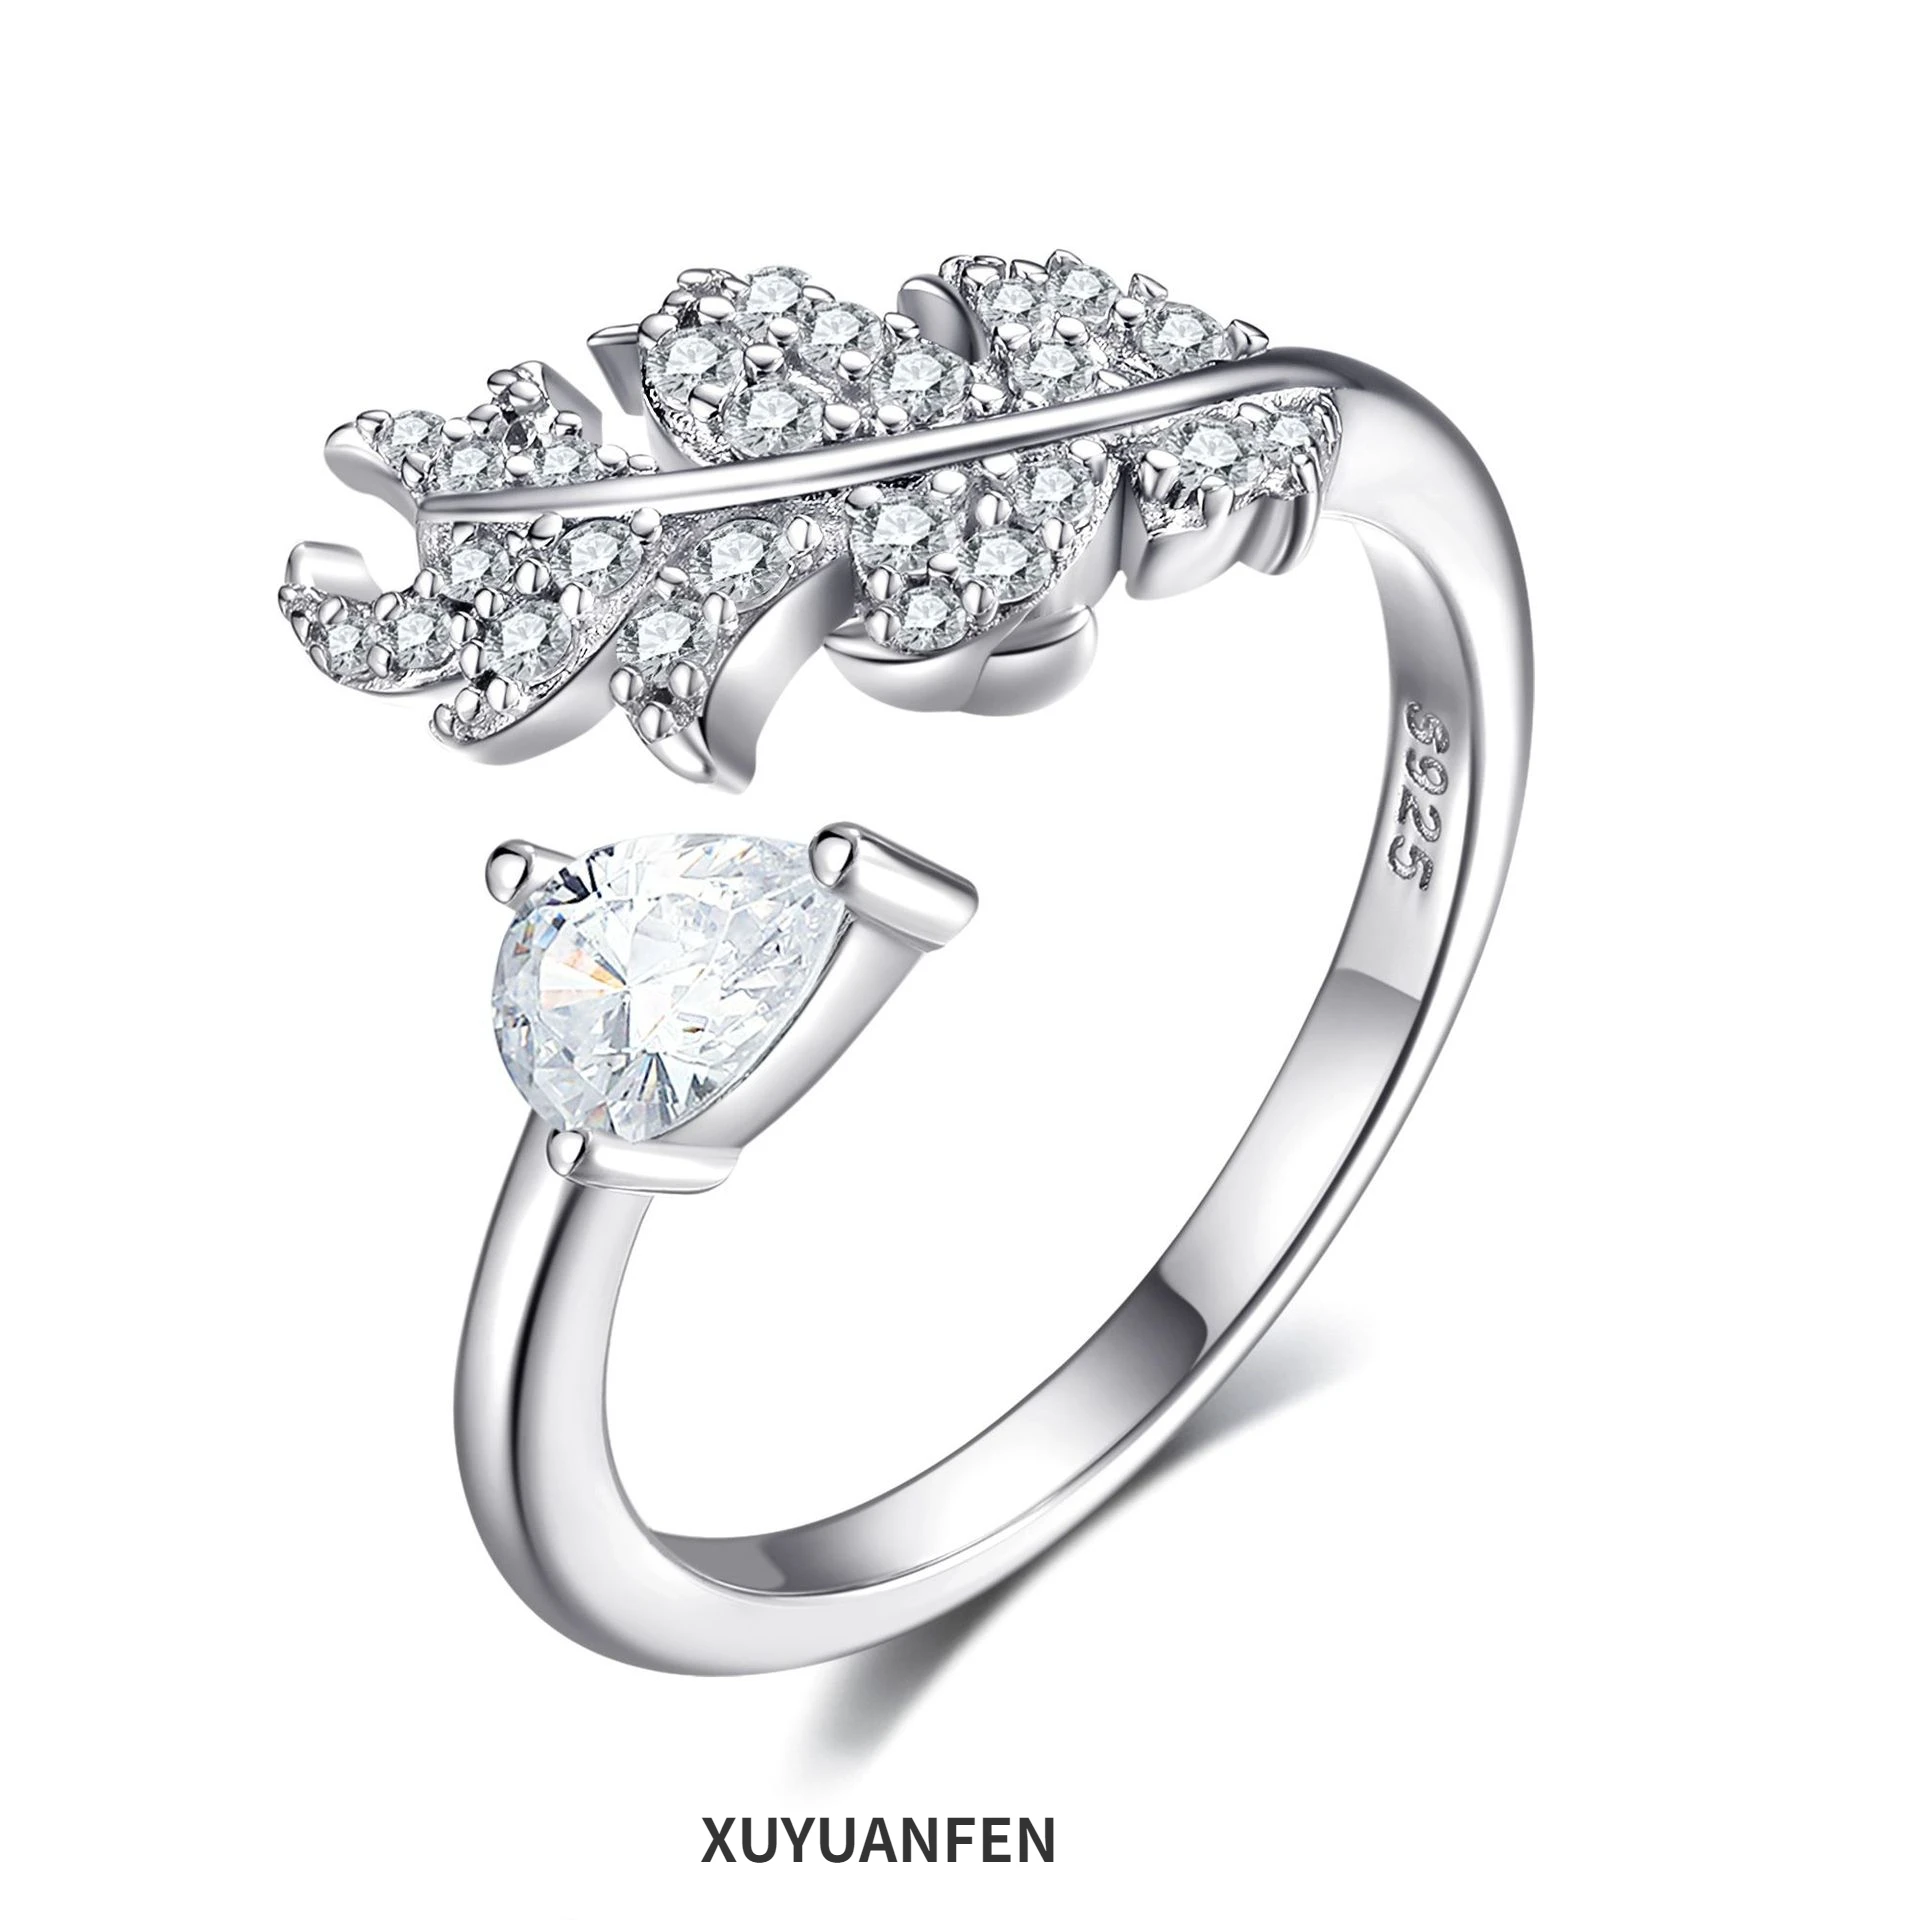 

XUYUANFENS925 Sterling Silver Open Ring with A High Sense Brand and Same Style Xiangjia Live Women's Ring, European and American